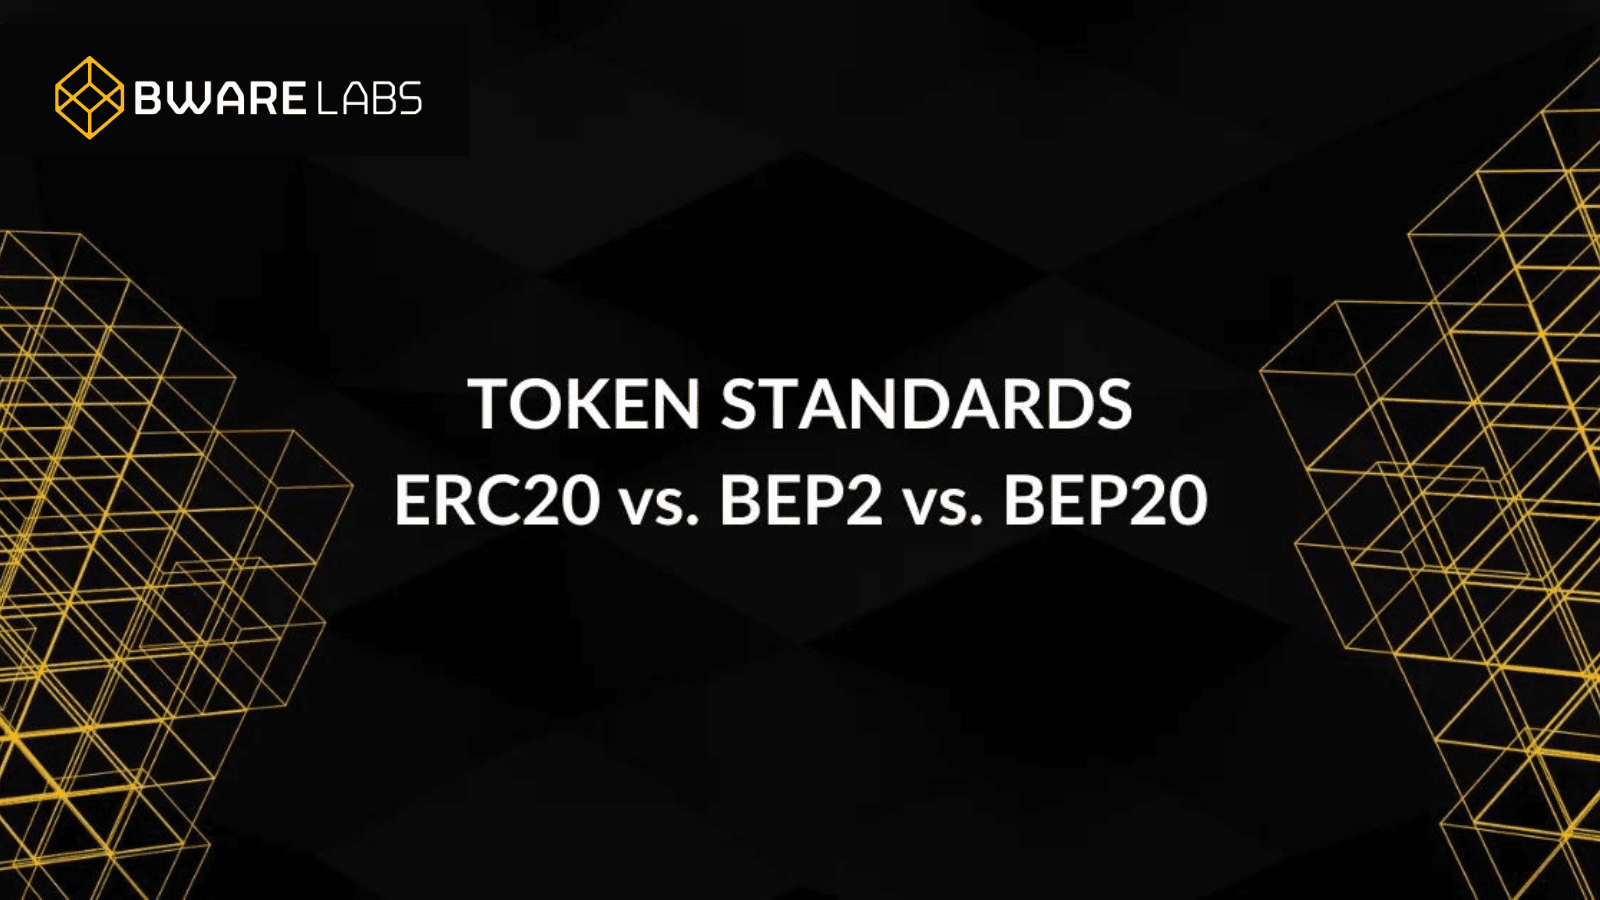 What’s the Difference Between ERC20 vs BEP2 vs BEP20?